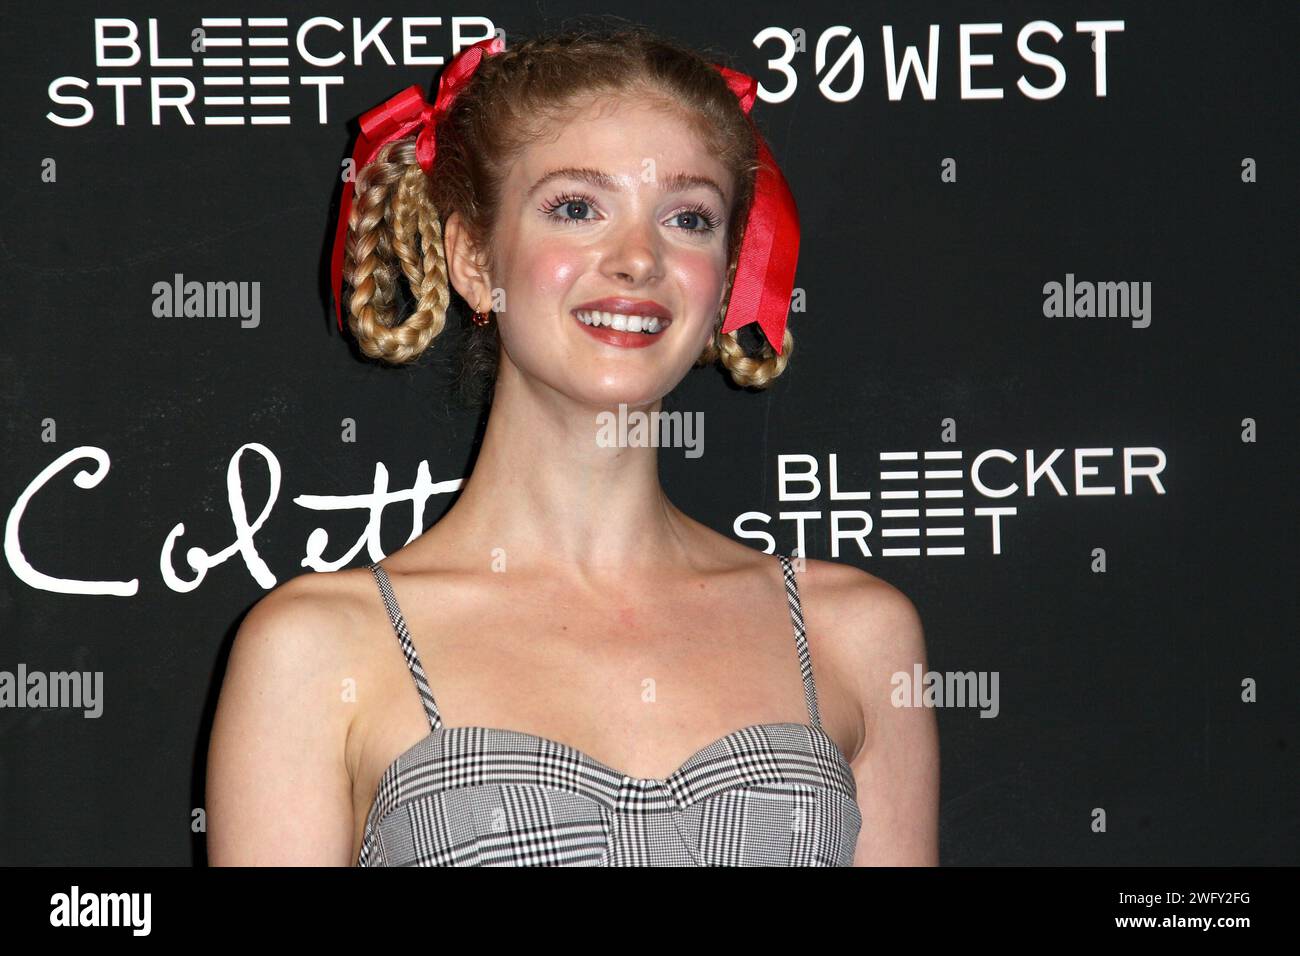 New York, NY, USA. 13 September, 2018. Elena Kampouris at the COLETTE Special Screening at the Museum of Modern Art (MOMA). Credit: Steve Mack/Alamy Stock Photo